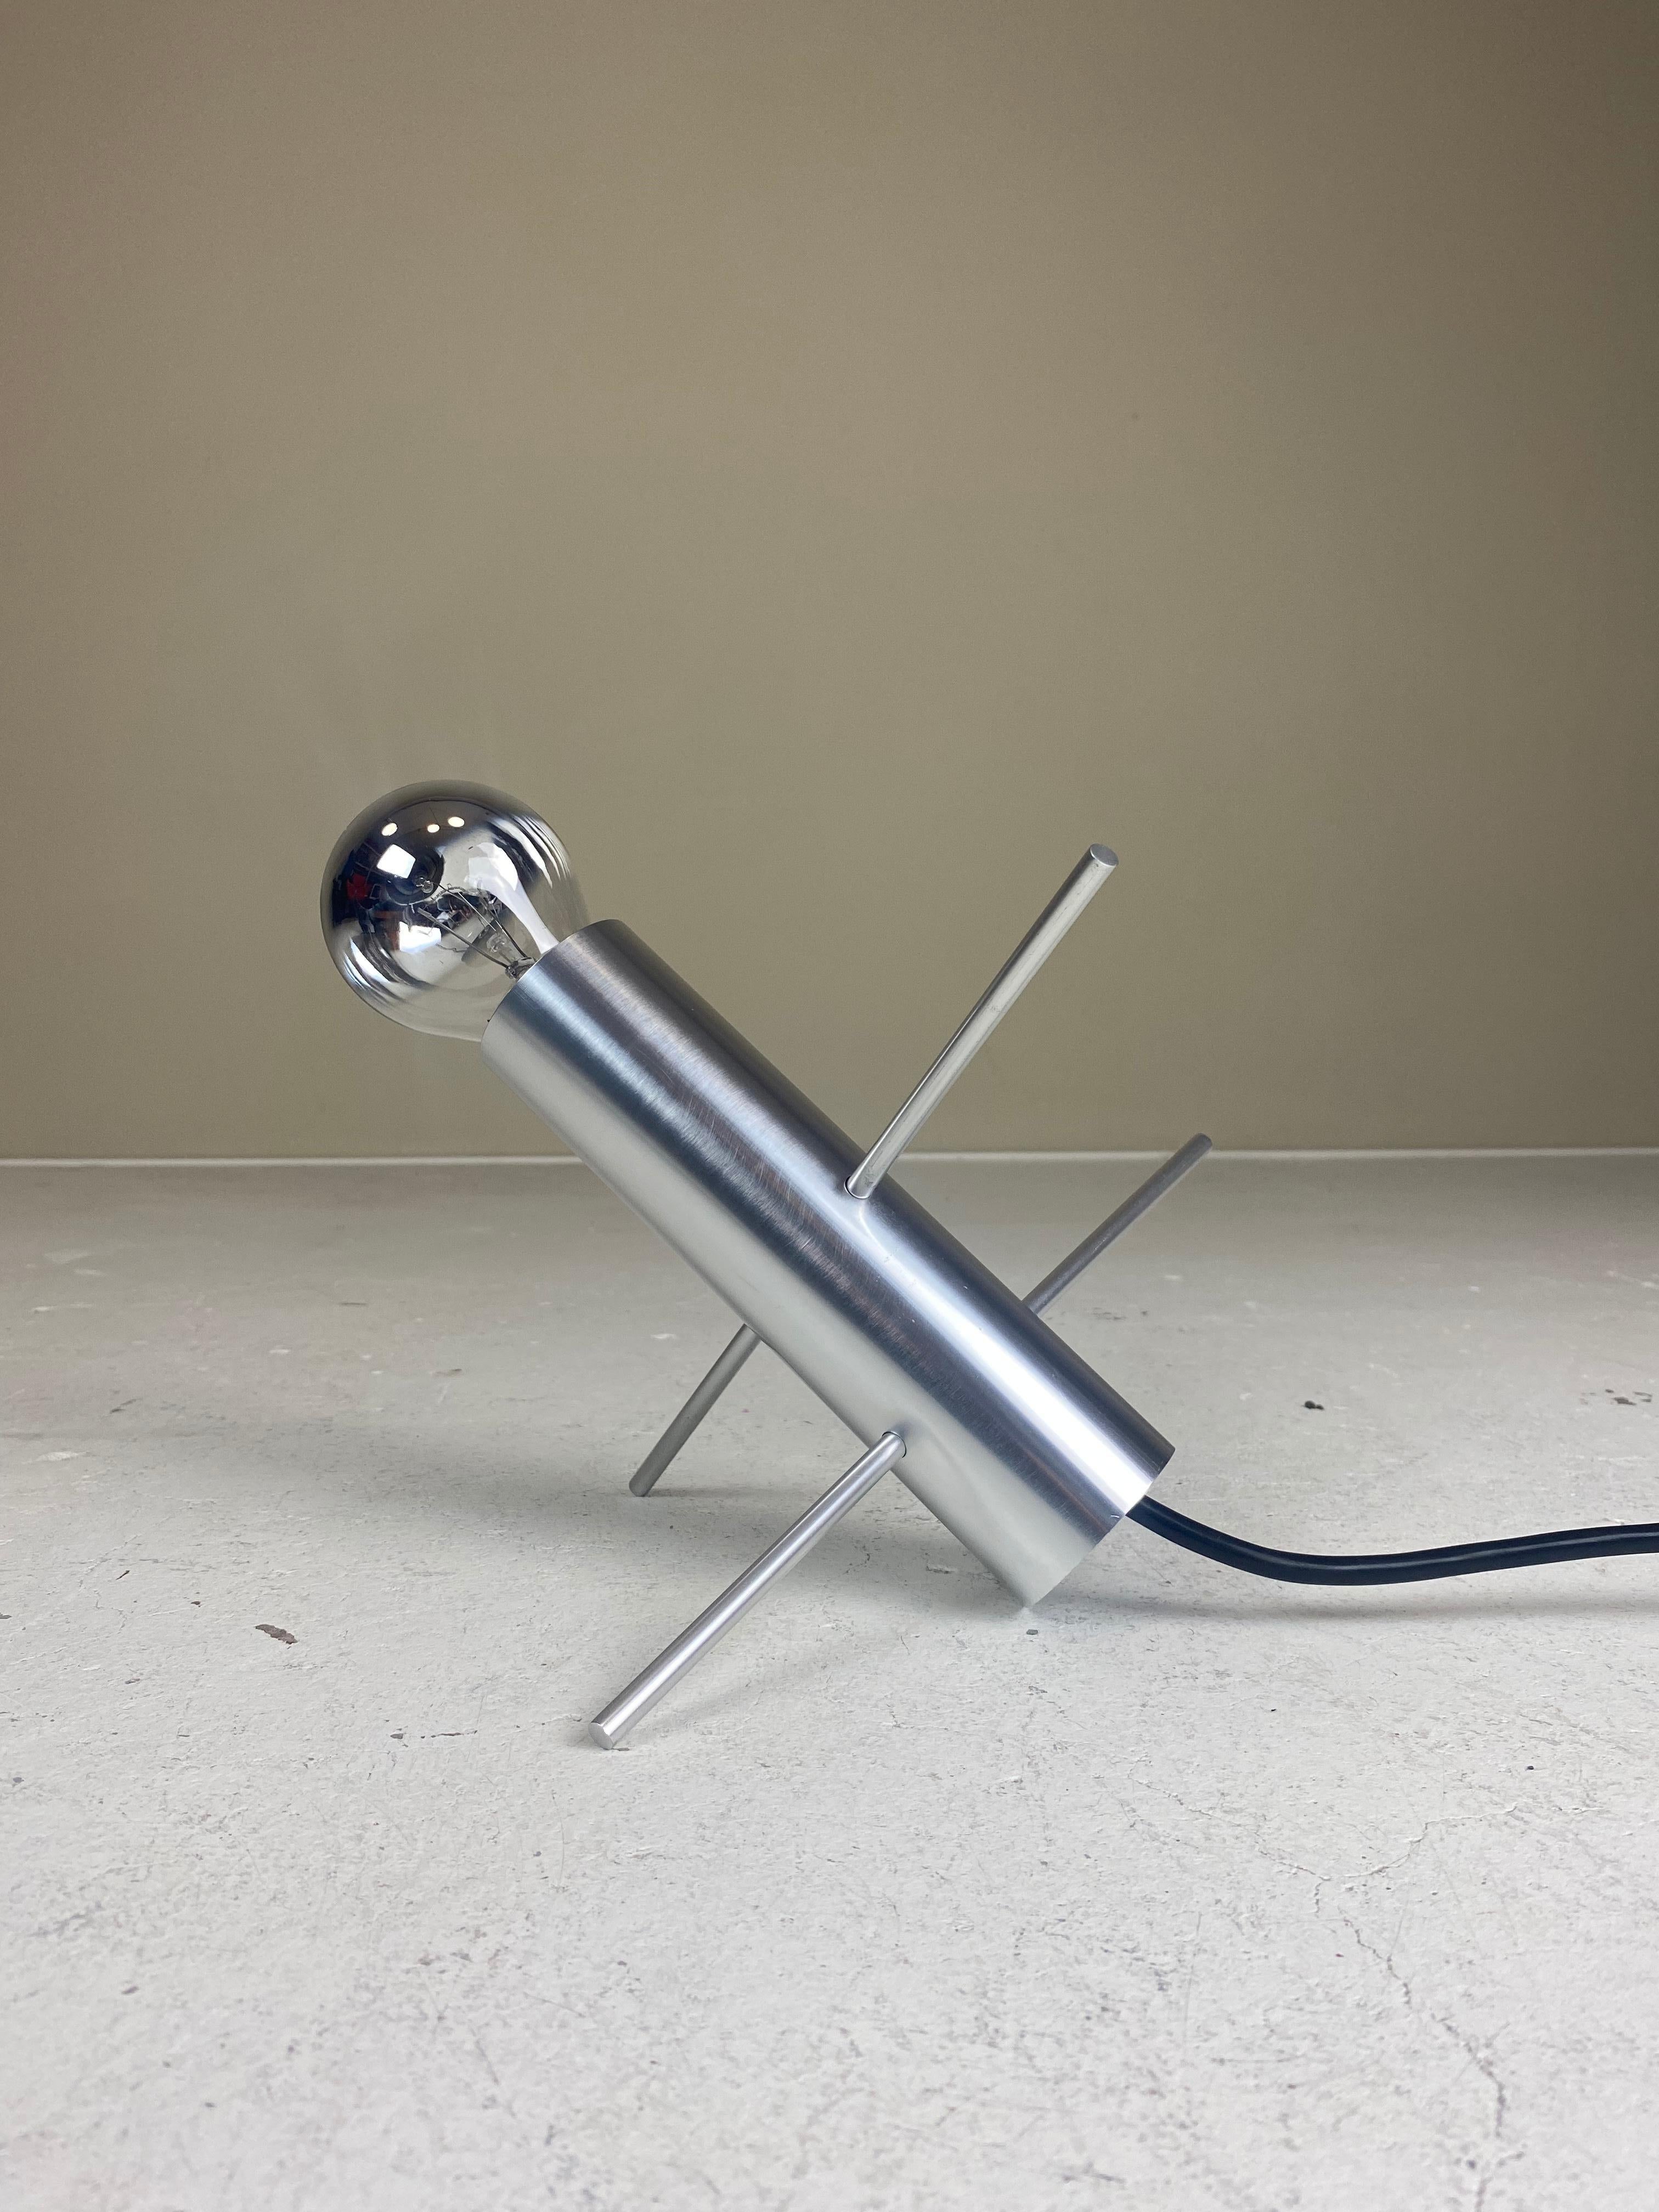 This stunning R-60 ‘Cricket’ table lamp was designed in 1962 by Otto Wasch for Raak Amsterdam. It consists of a polished metal cilinder with two pins in it, a touch of minimalist genius. By changing the postion of the pins, the lamp can be placed in